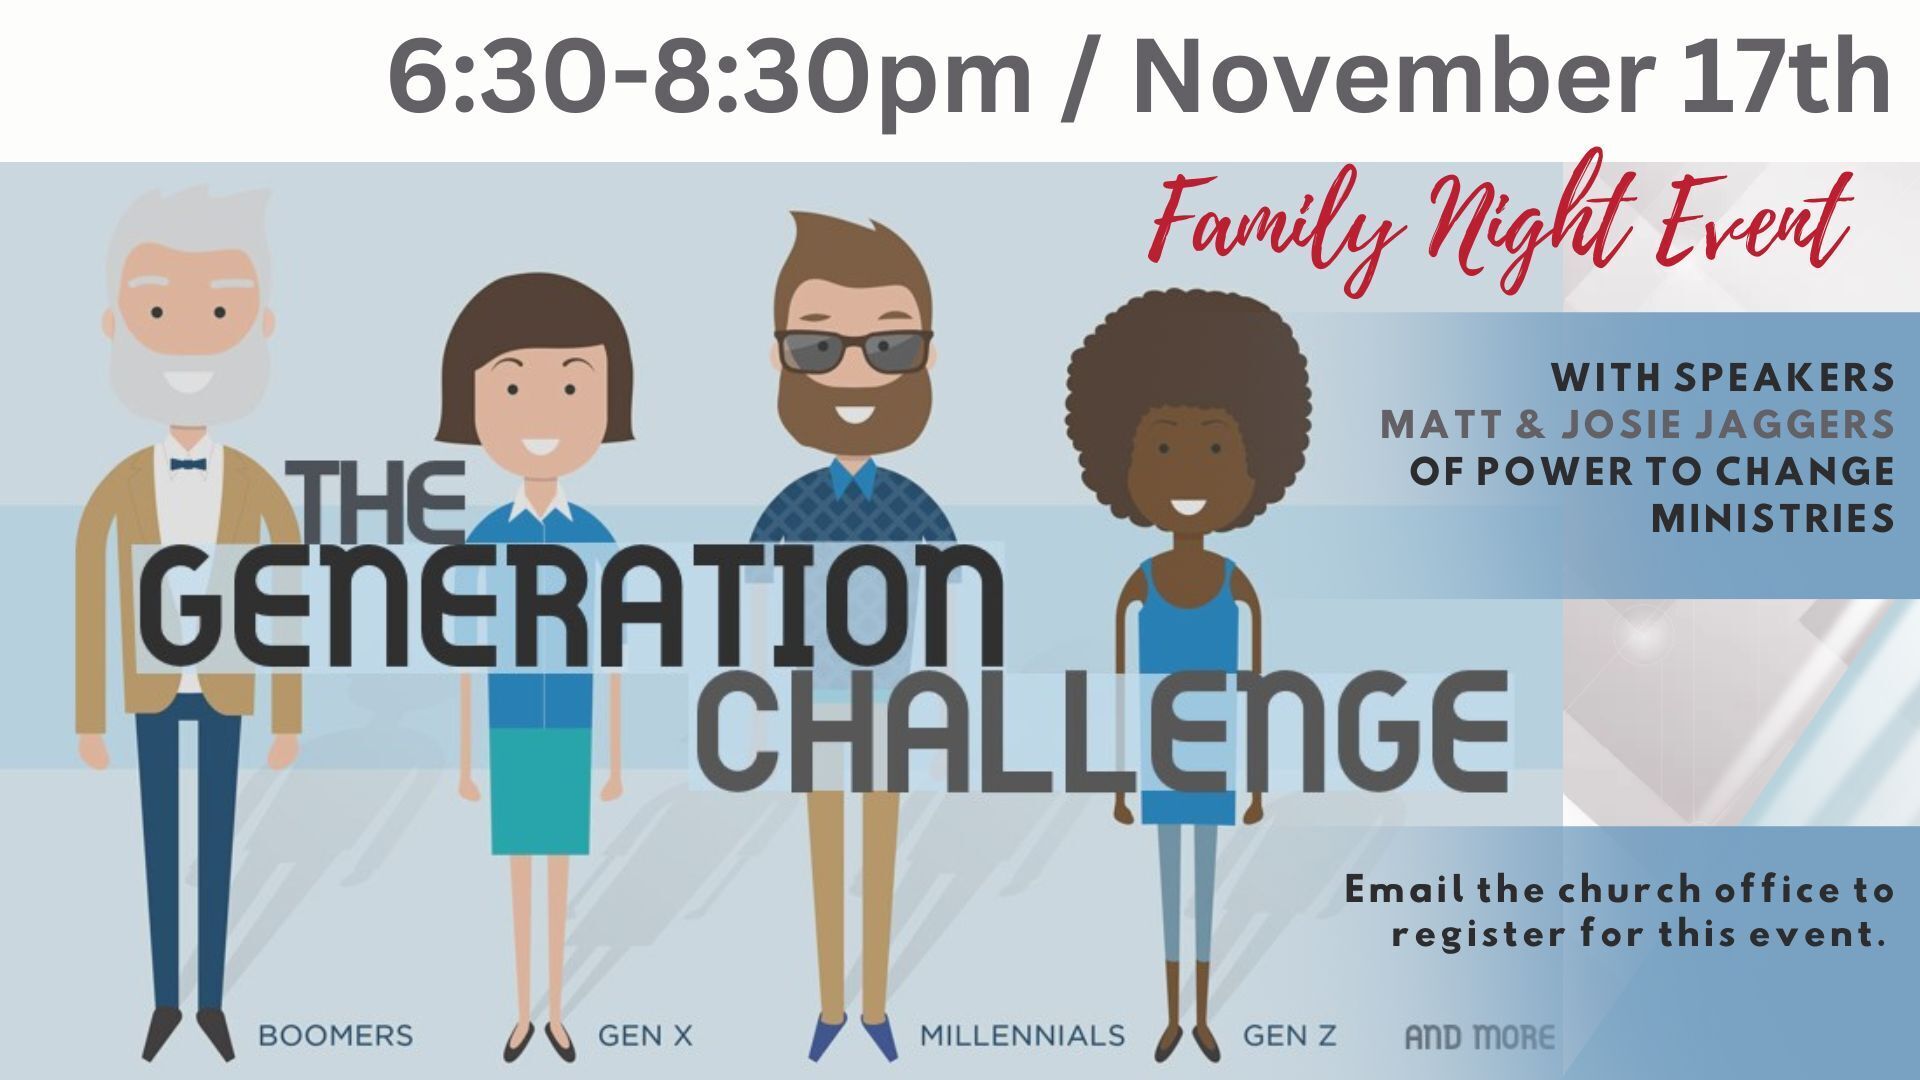 The Generational Challenge November 17th